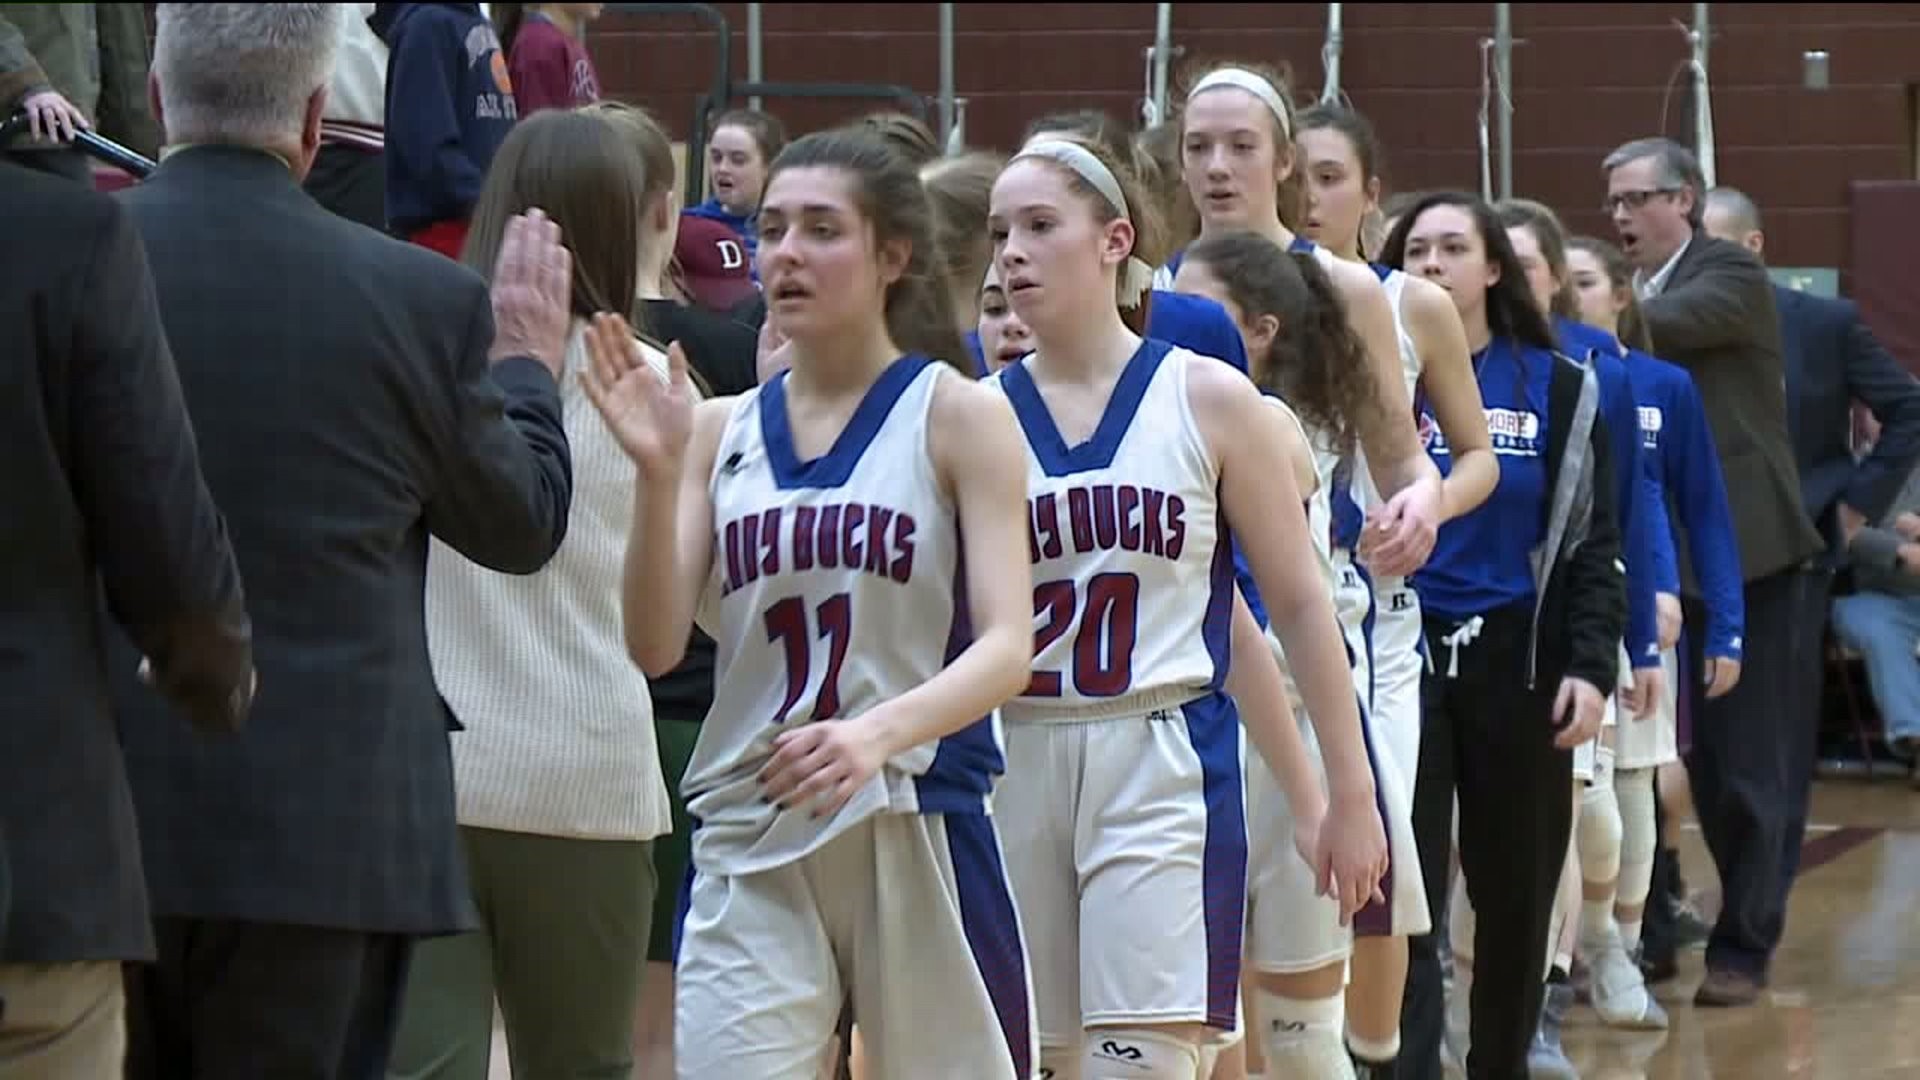 Dunmore Lady Bucks preview